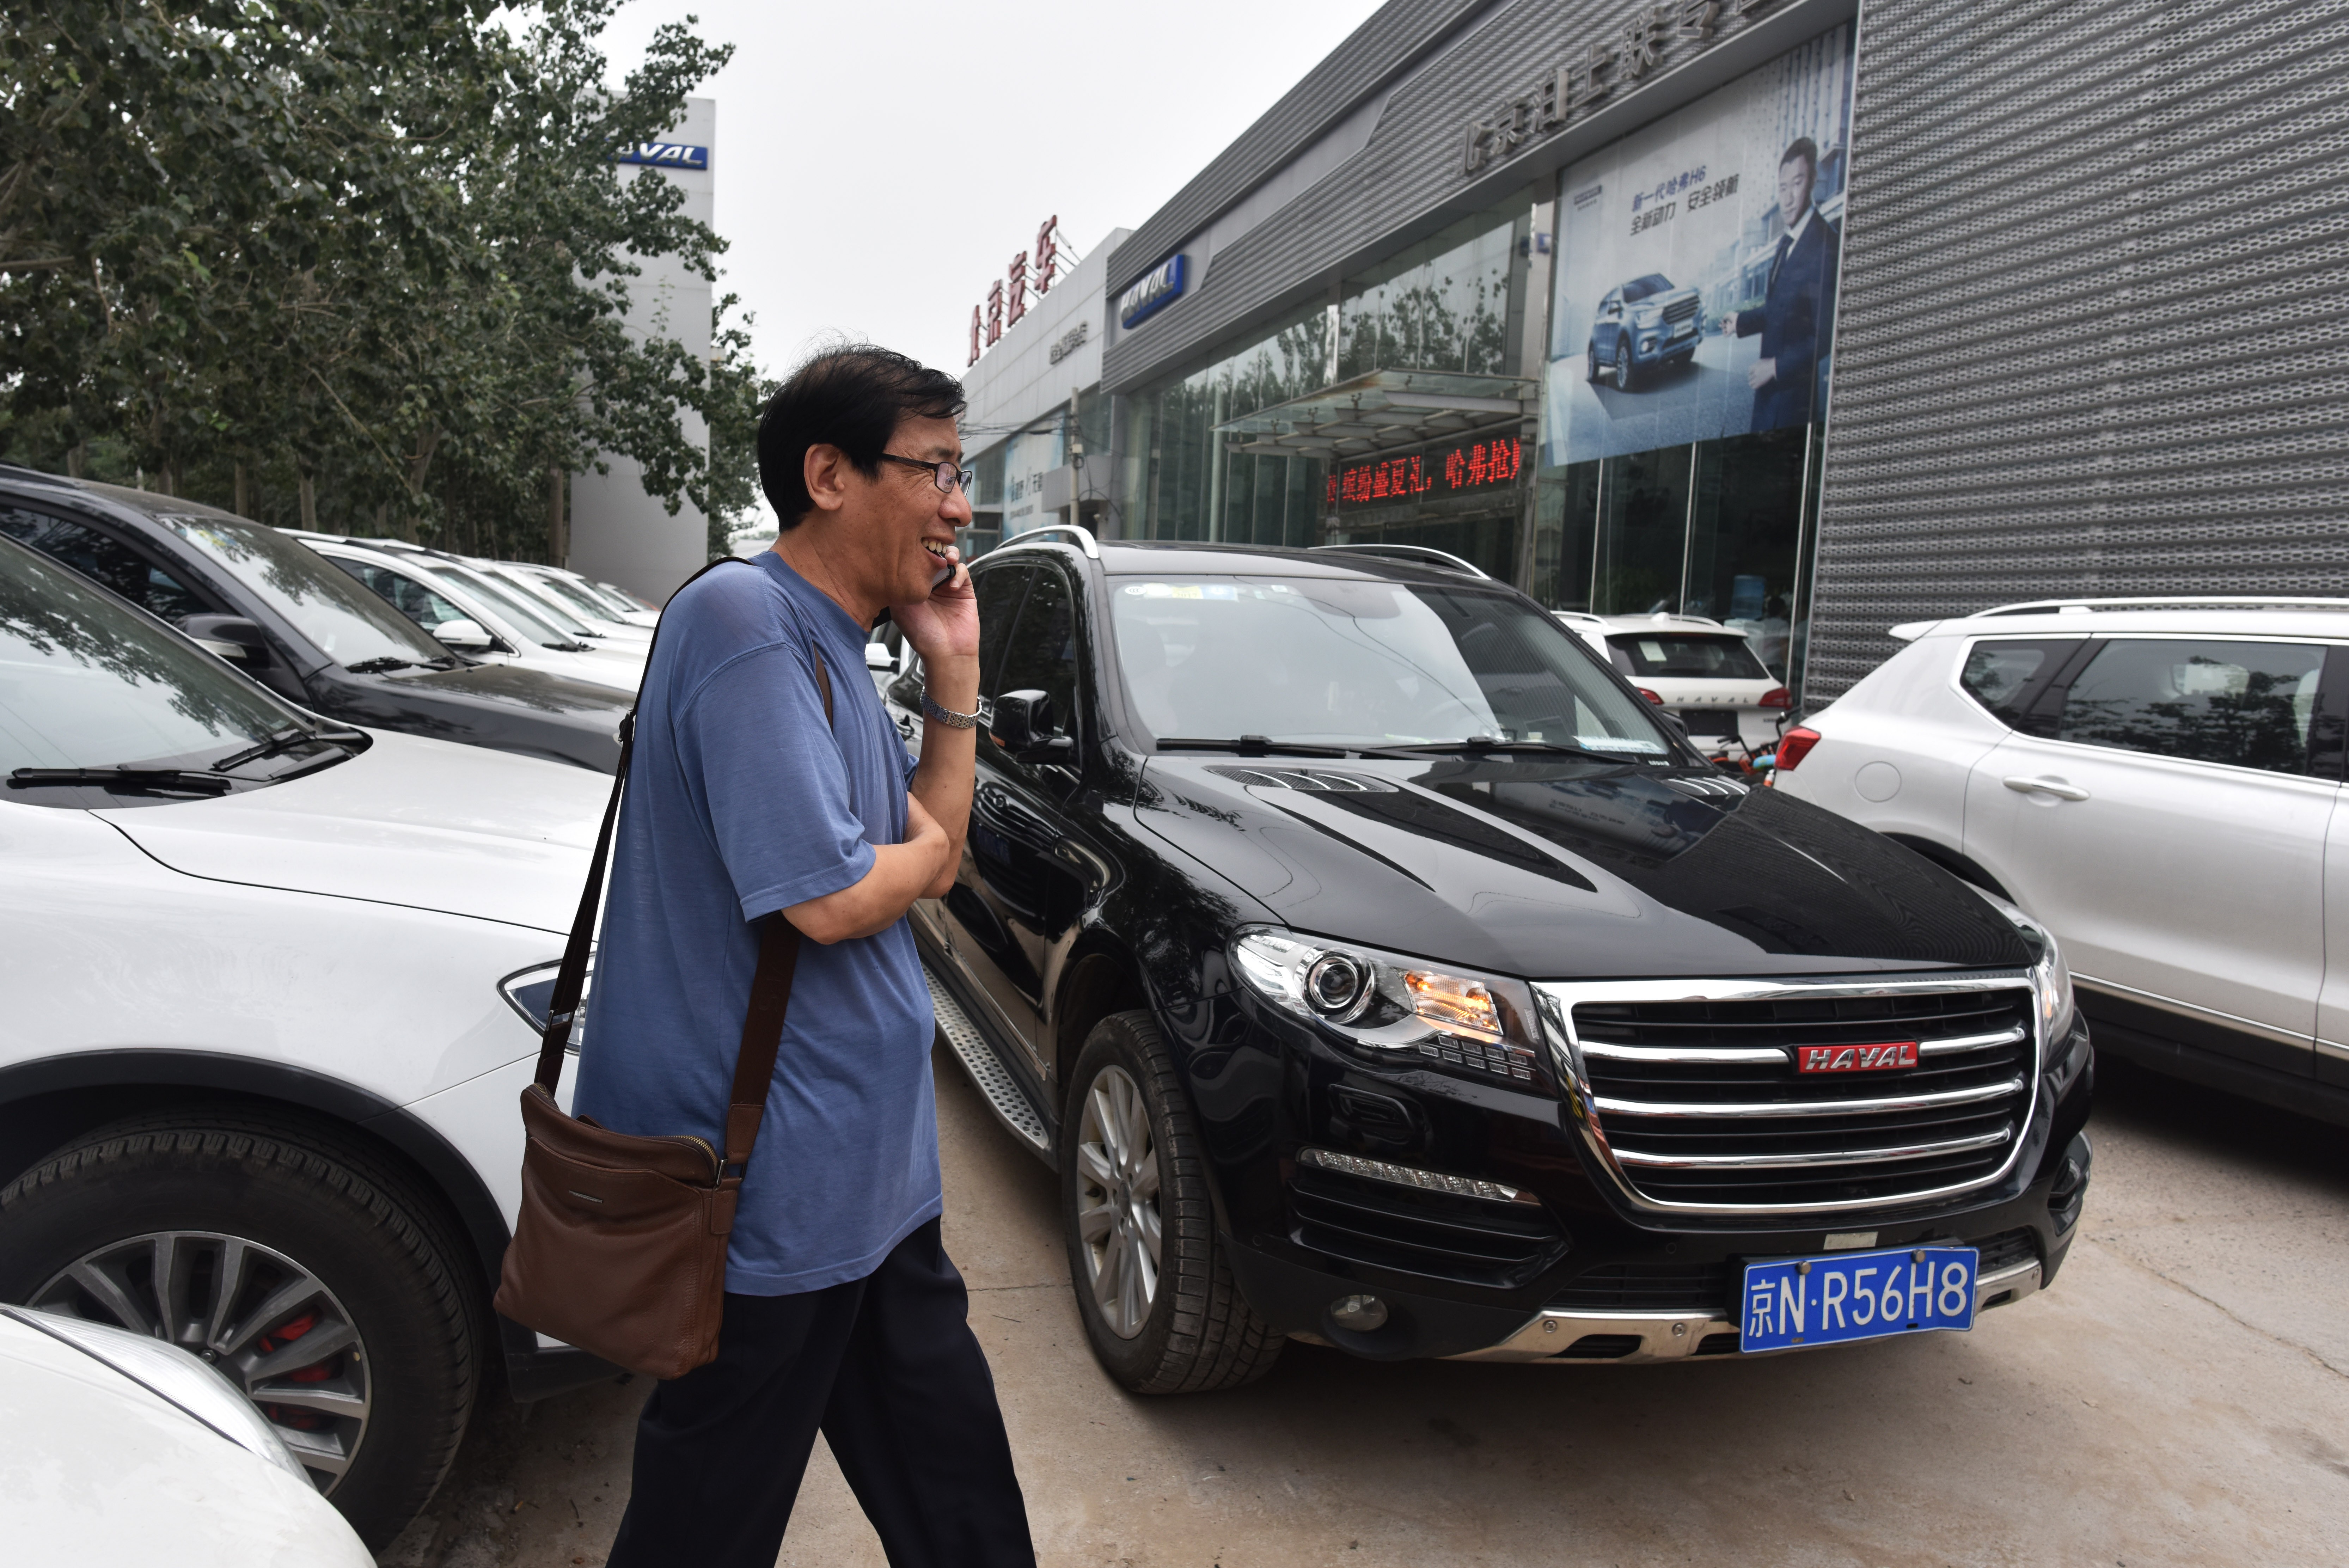 The SVOLT plant’s first customer is likely to be Great Wall Motors. Photo: AFP